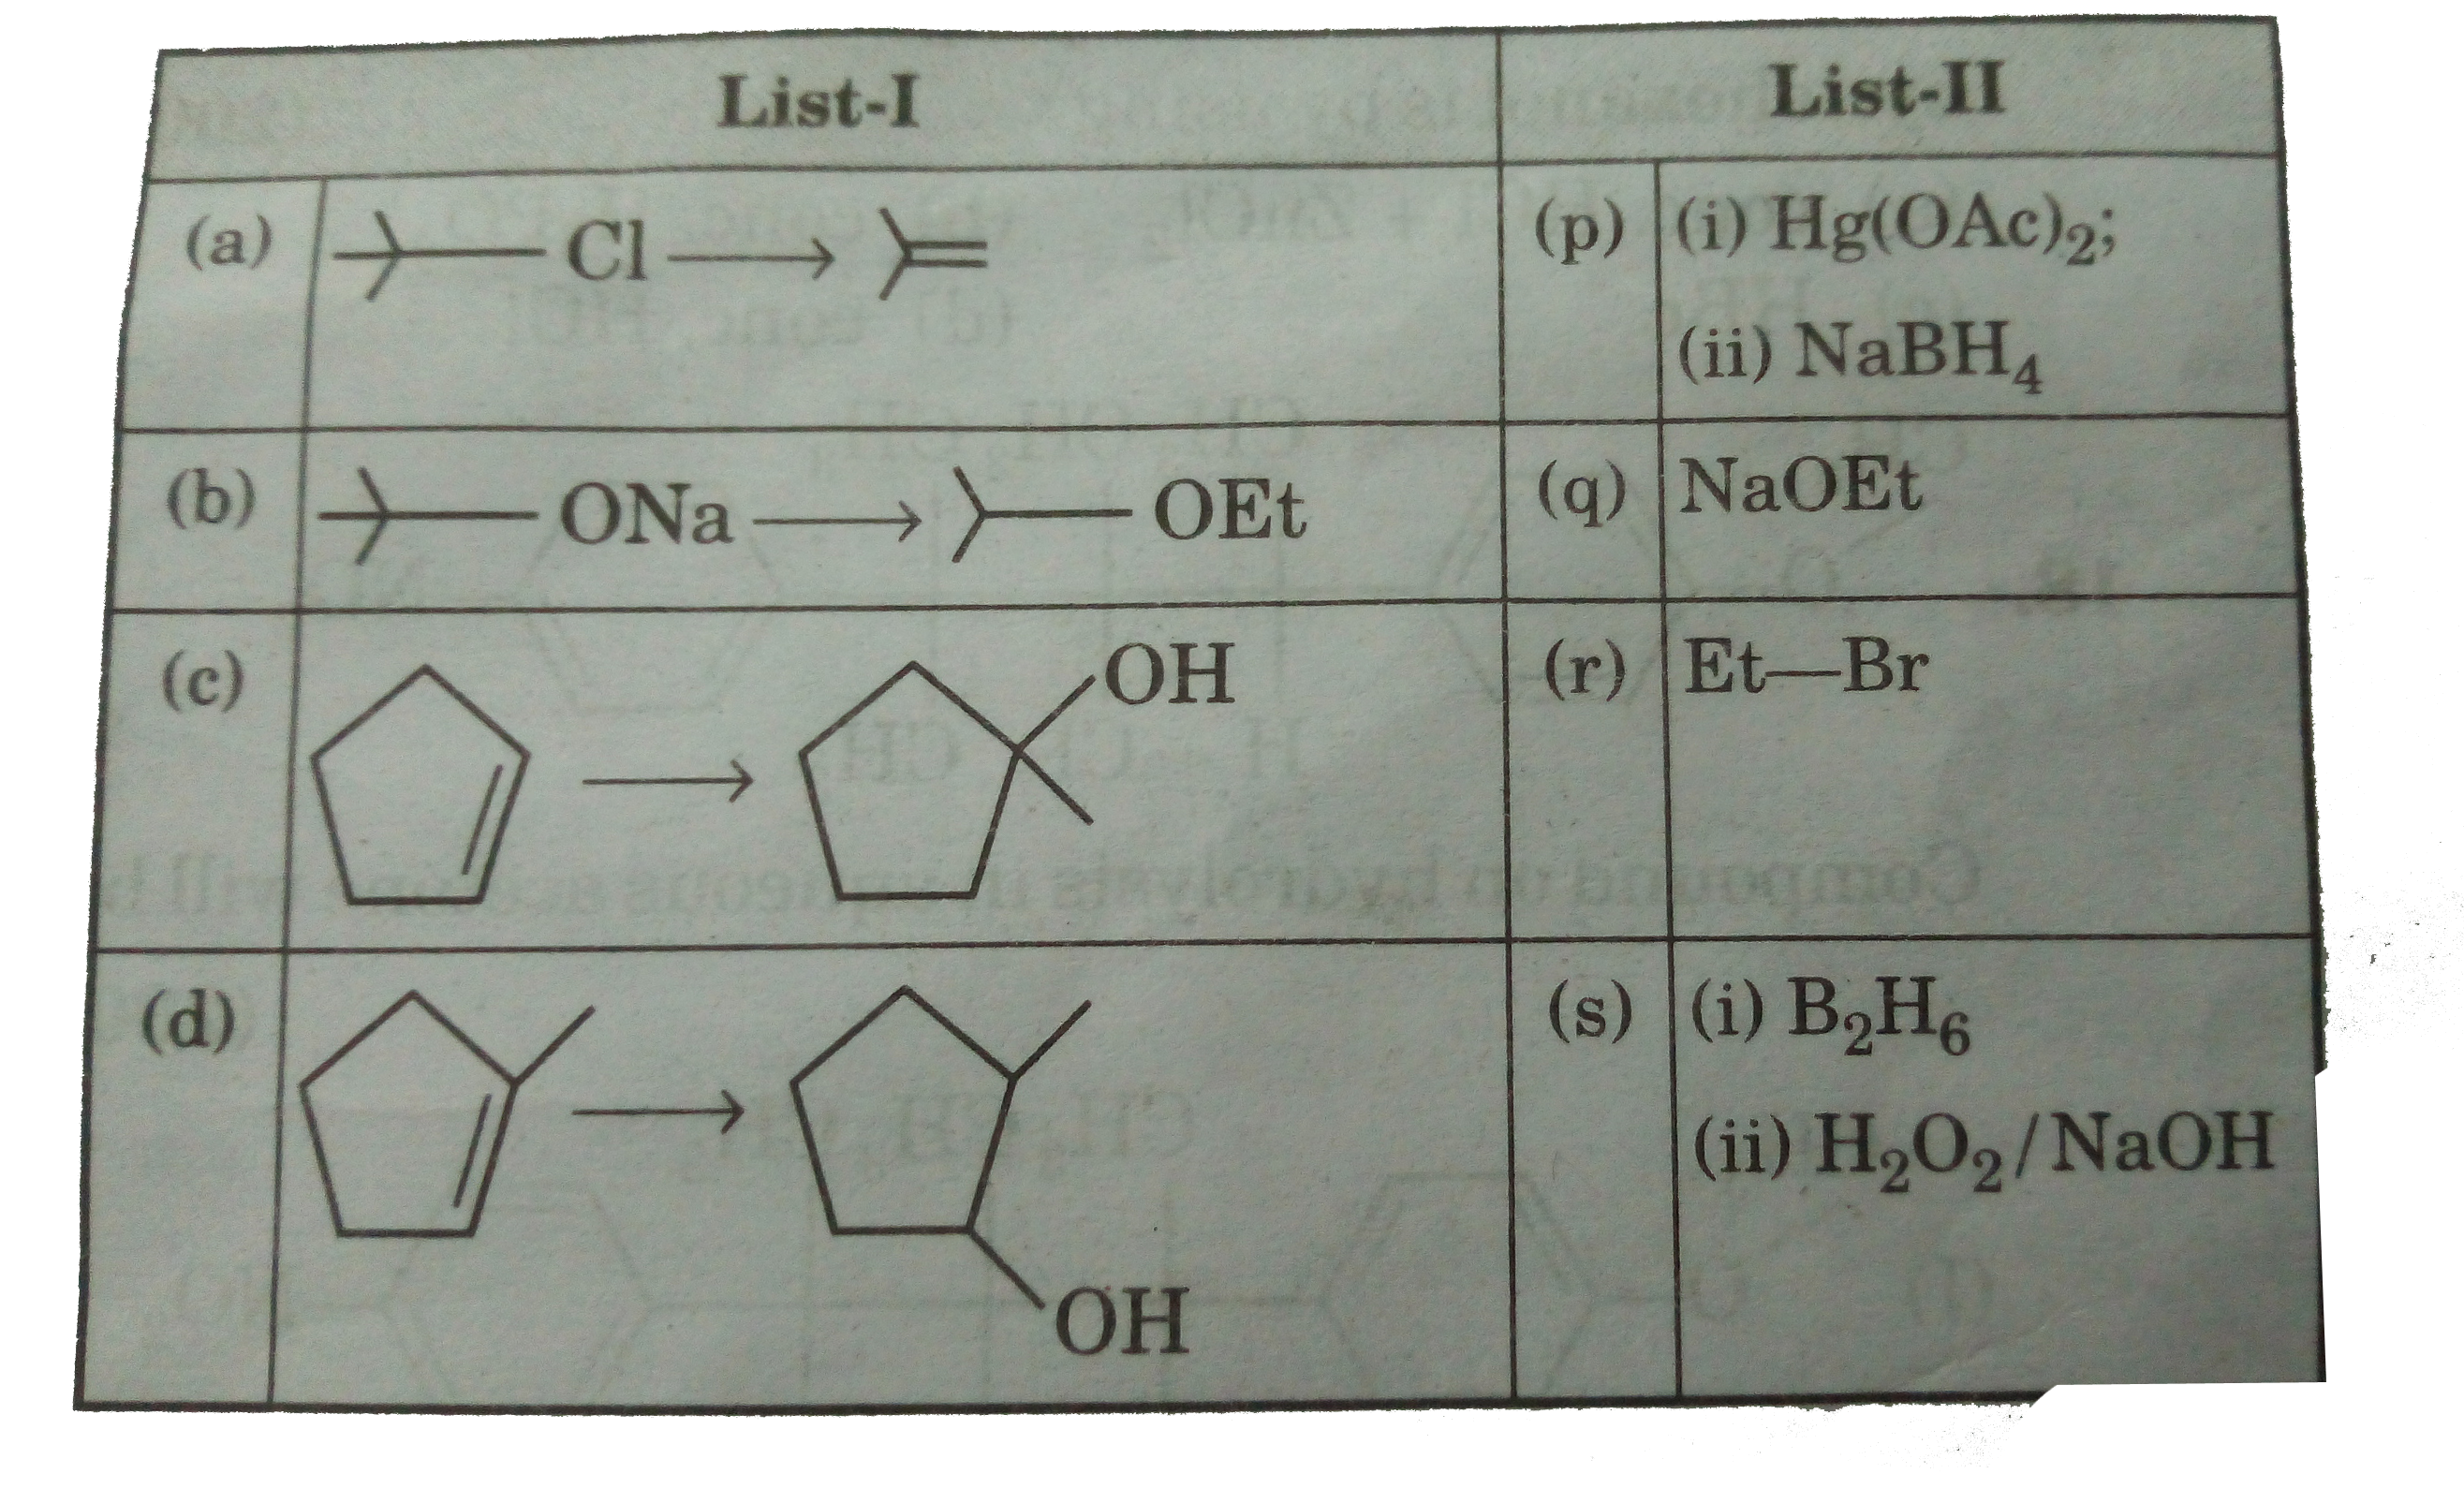 Match the chemical conversions in List -I with the appropriate reagents in List-II and select the correct answer using the code given below and lists.